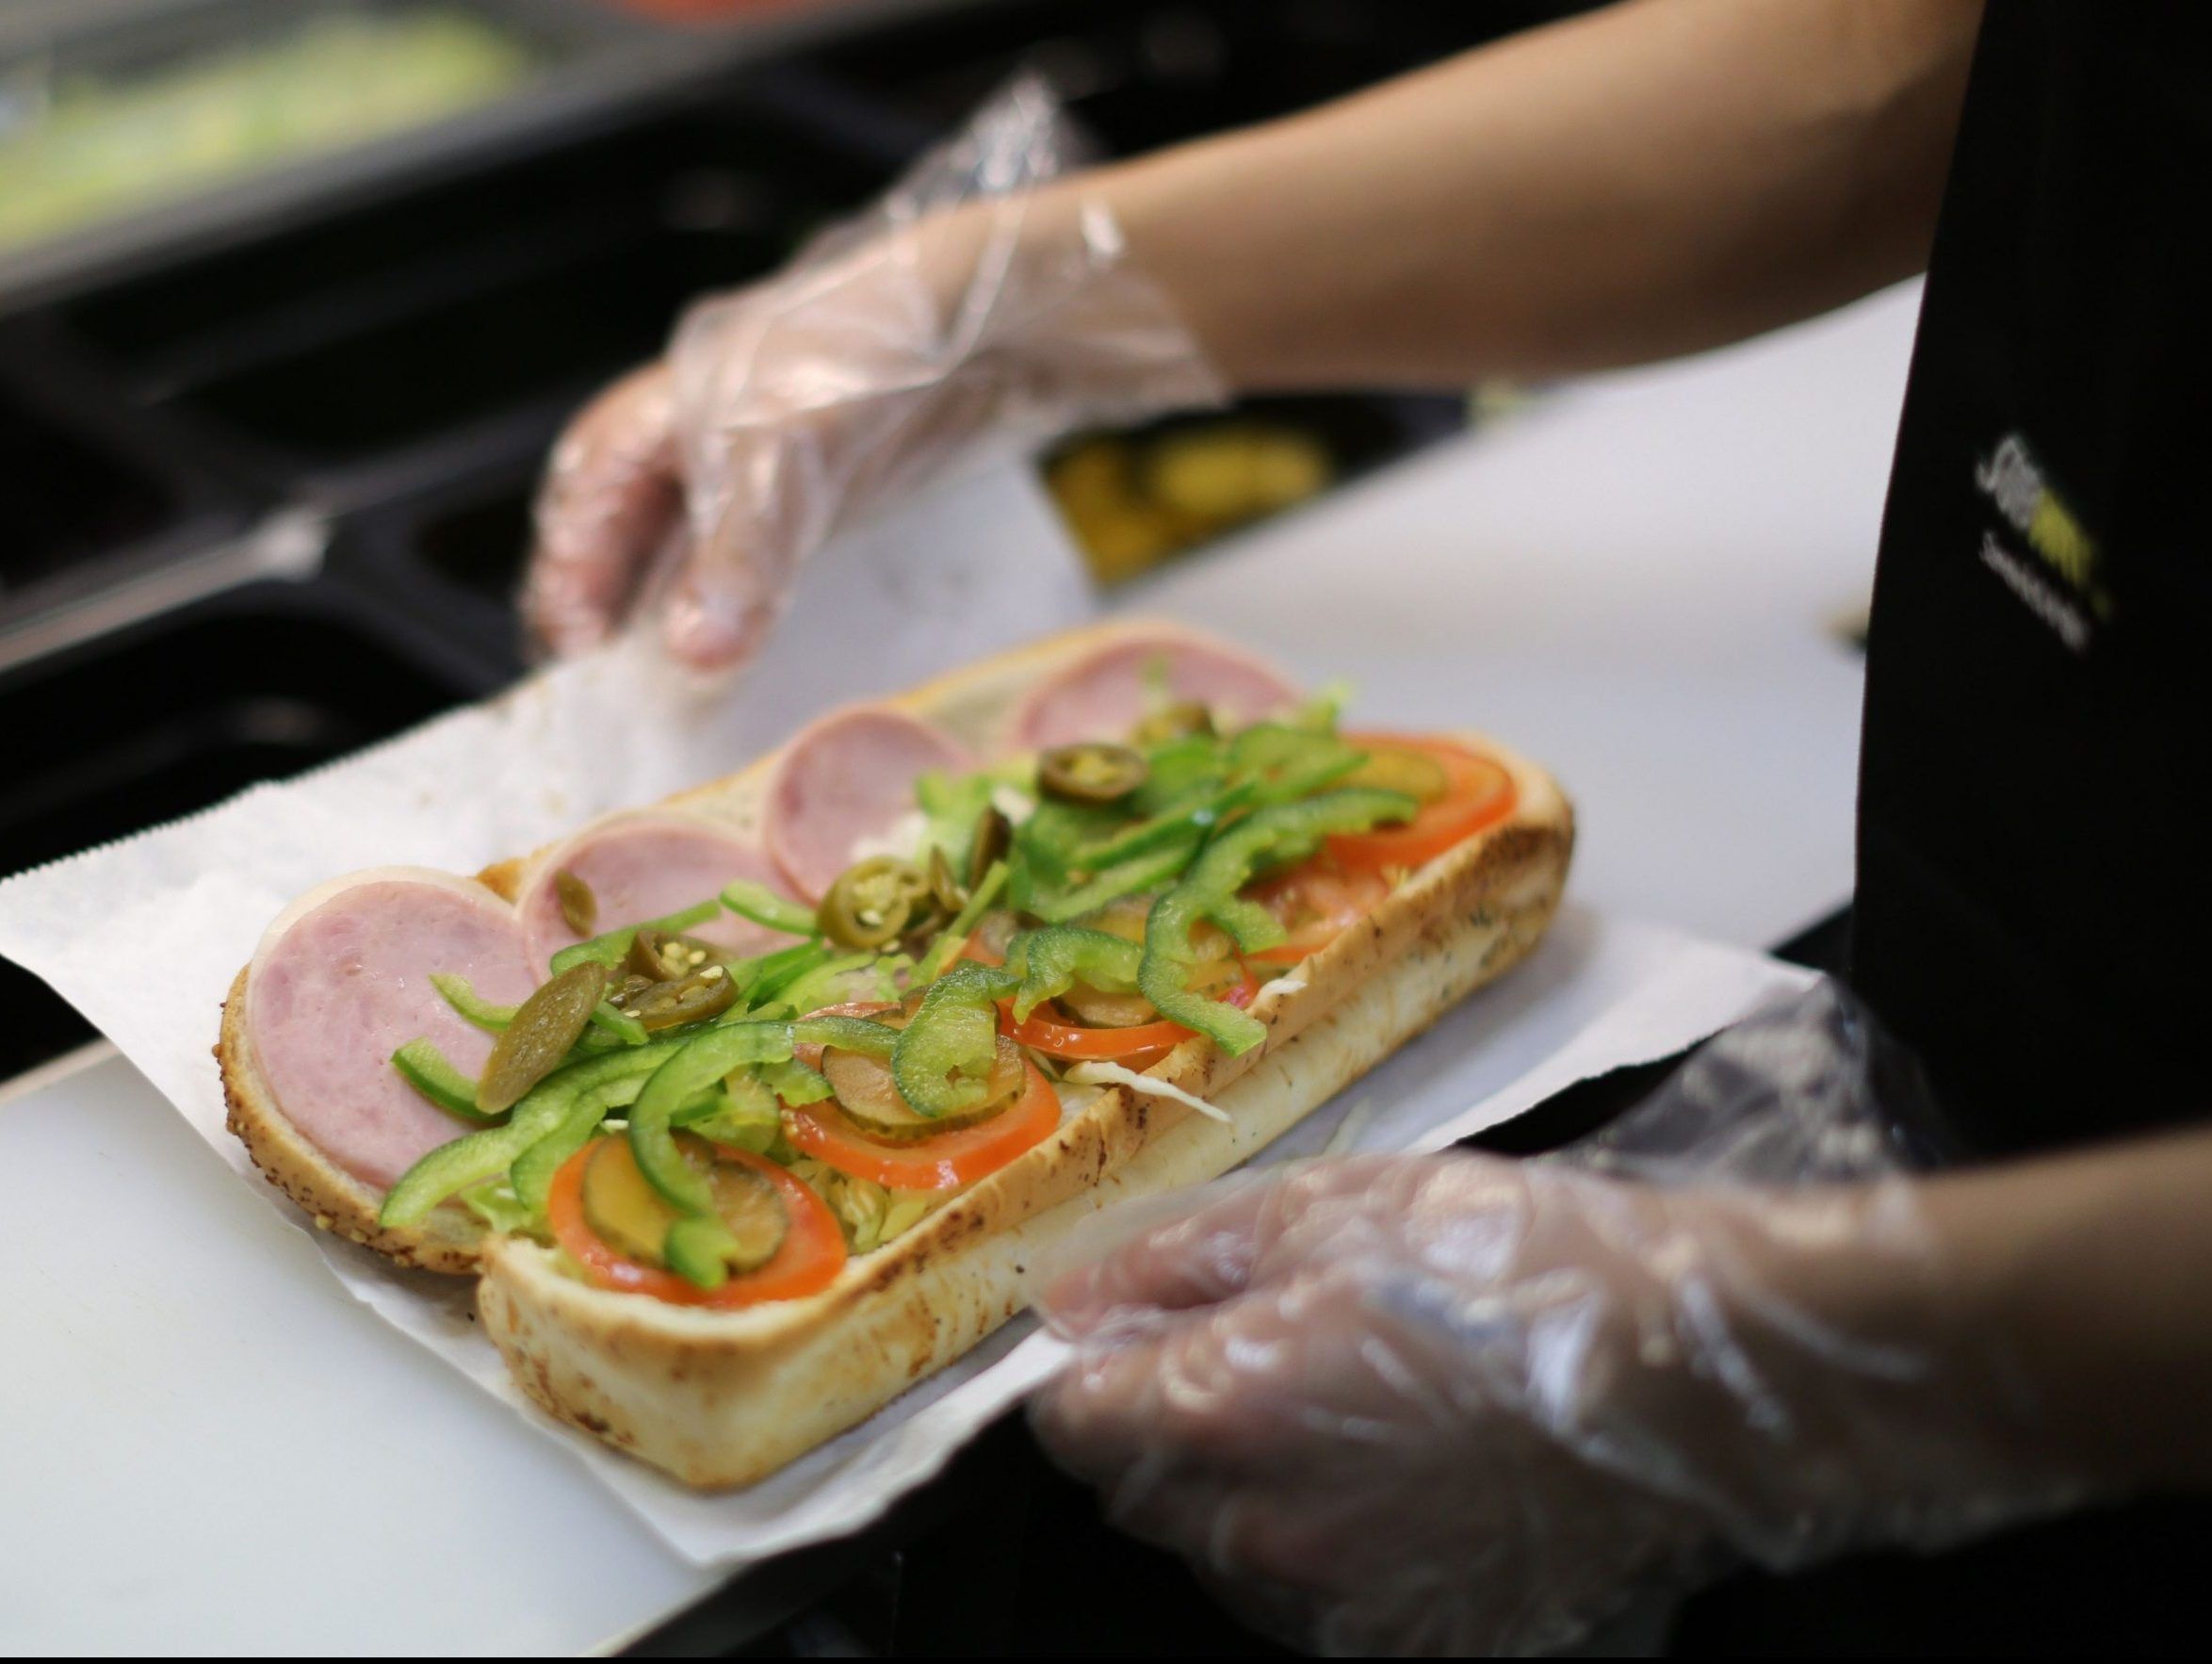 Subway worker killed for putting 'too much mayonnaise' on sandwich